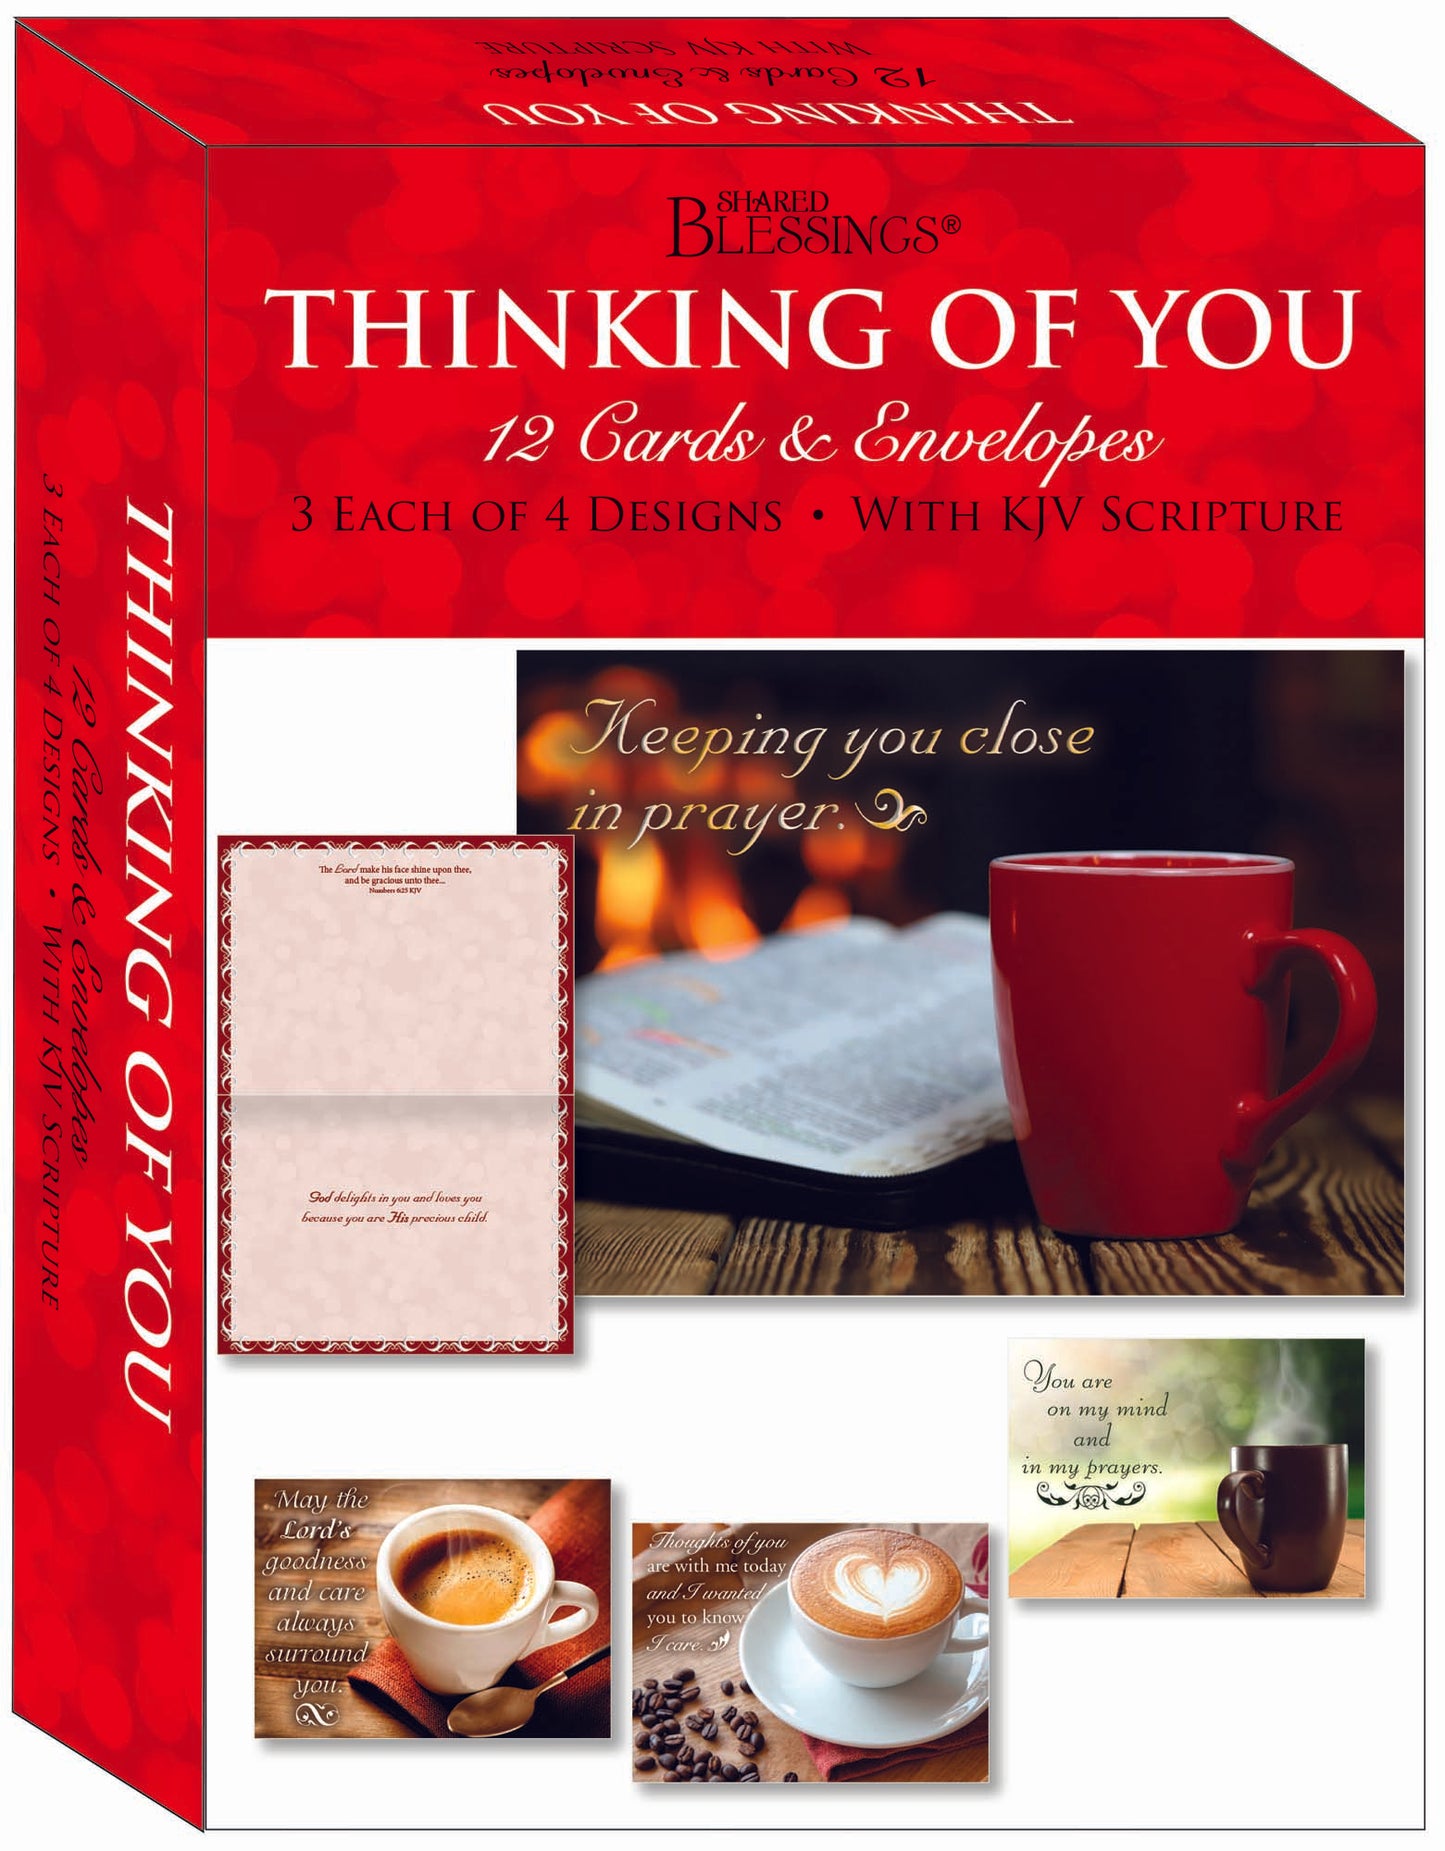 Thinking of You - Blessed Thoughts - Assorted Thinking of You Cards